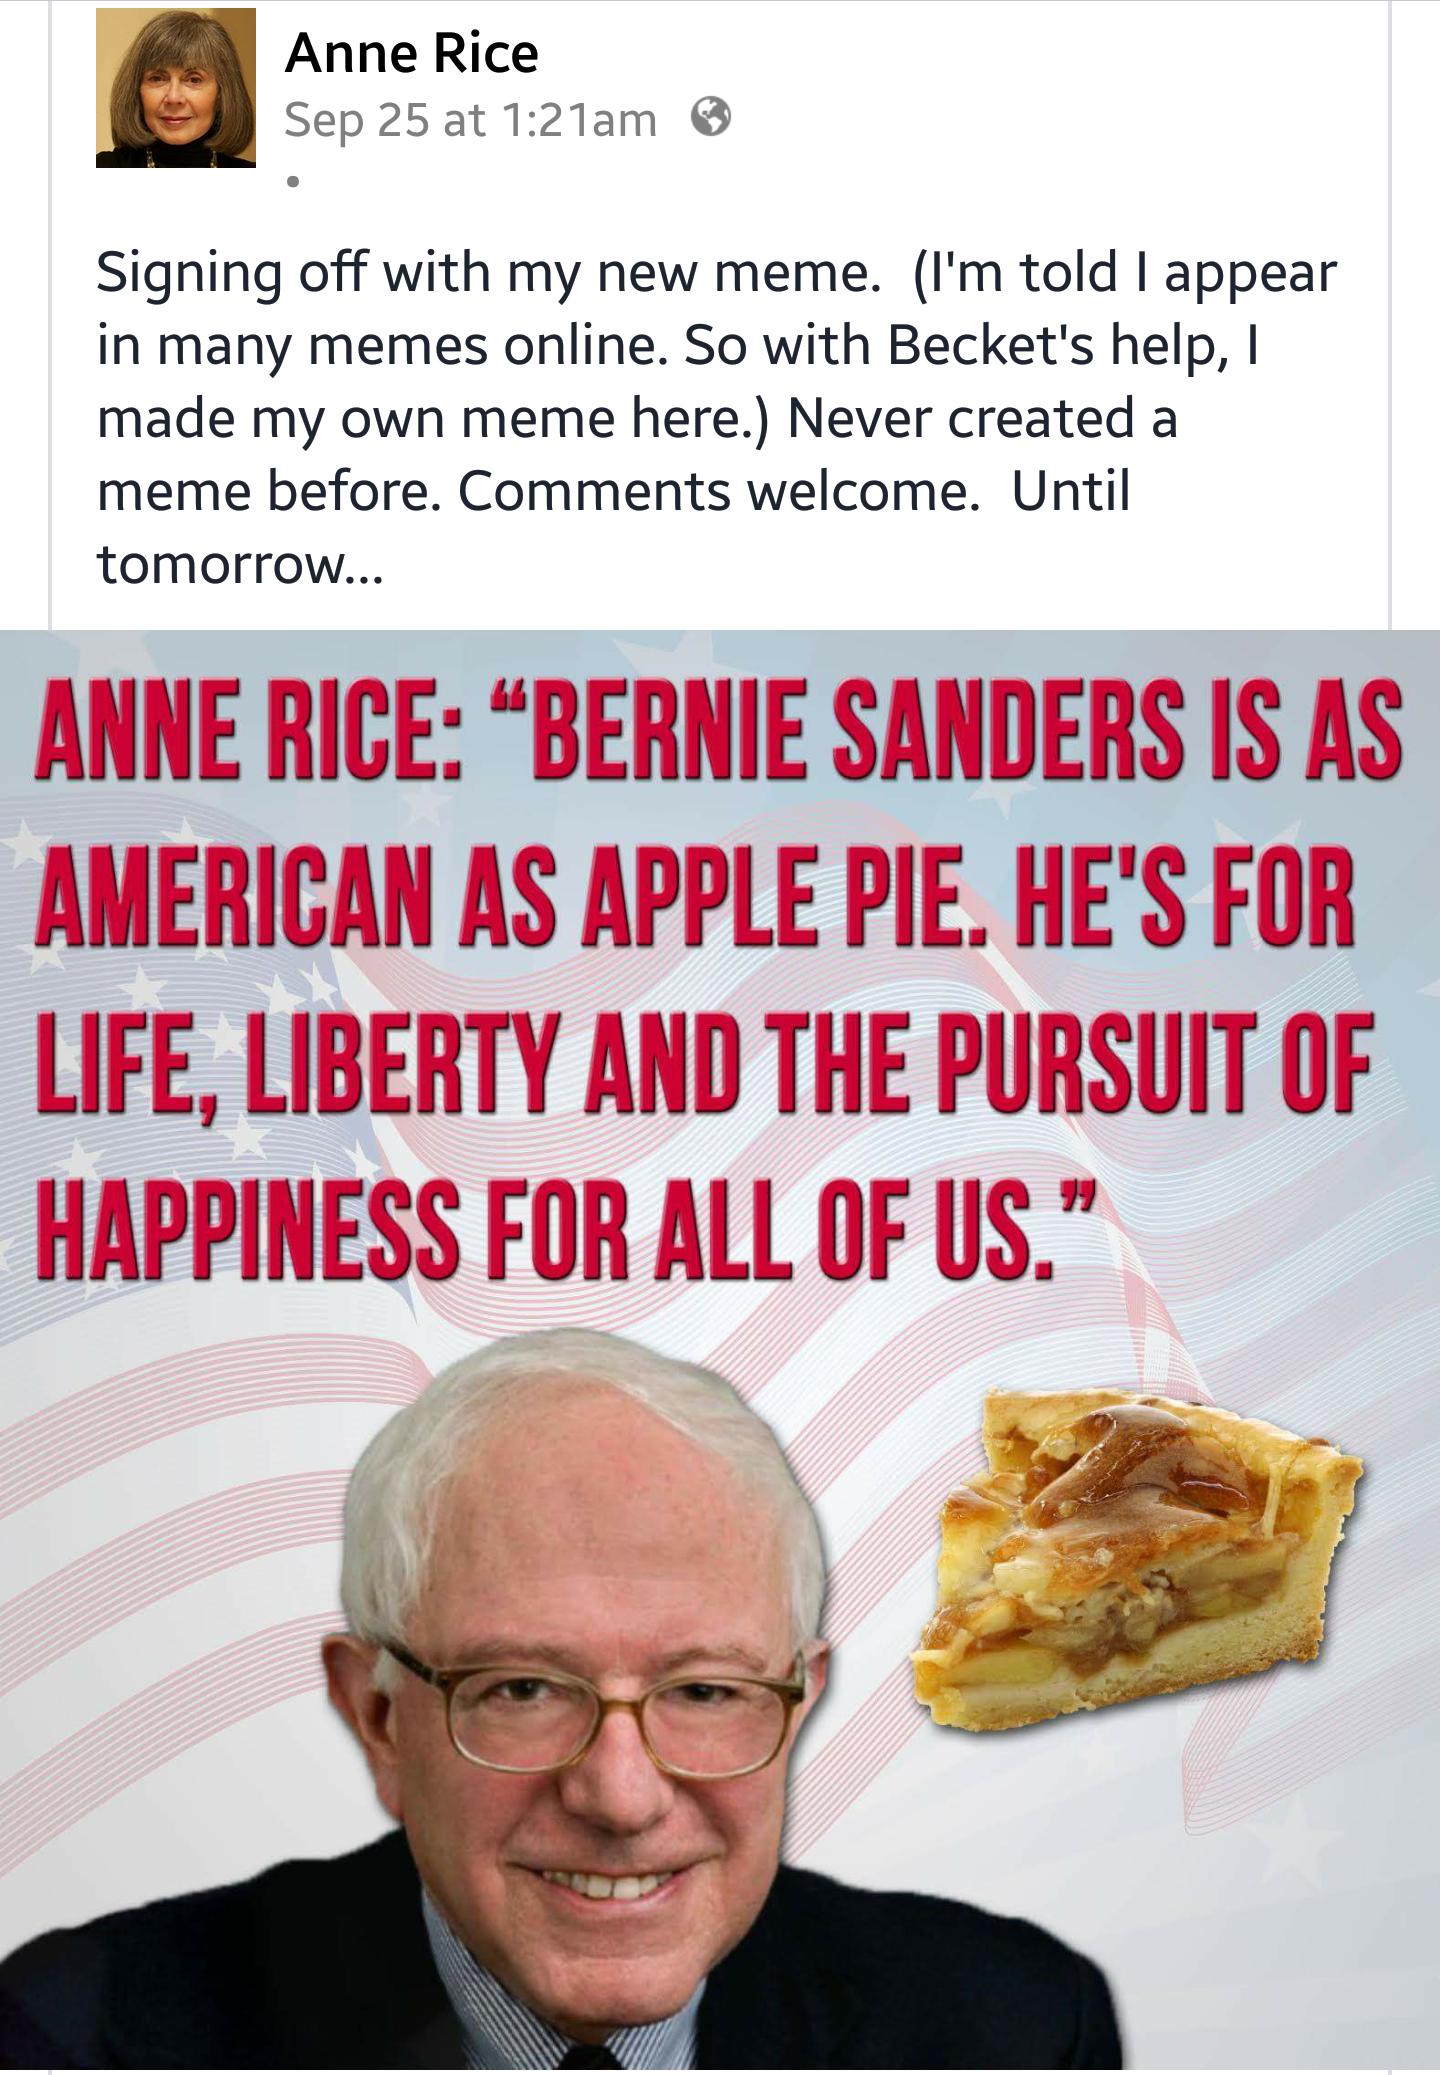 anne rice meme - Anne Rice Sep 25 at am Signing off with my new meme. I'm told I appear in many memes online. So with Becket's help, I made my own meme here. Never created a meme before. welcome. Until tomorrow... Anne Rice Bernie Sanders Is As American A